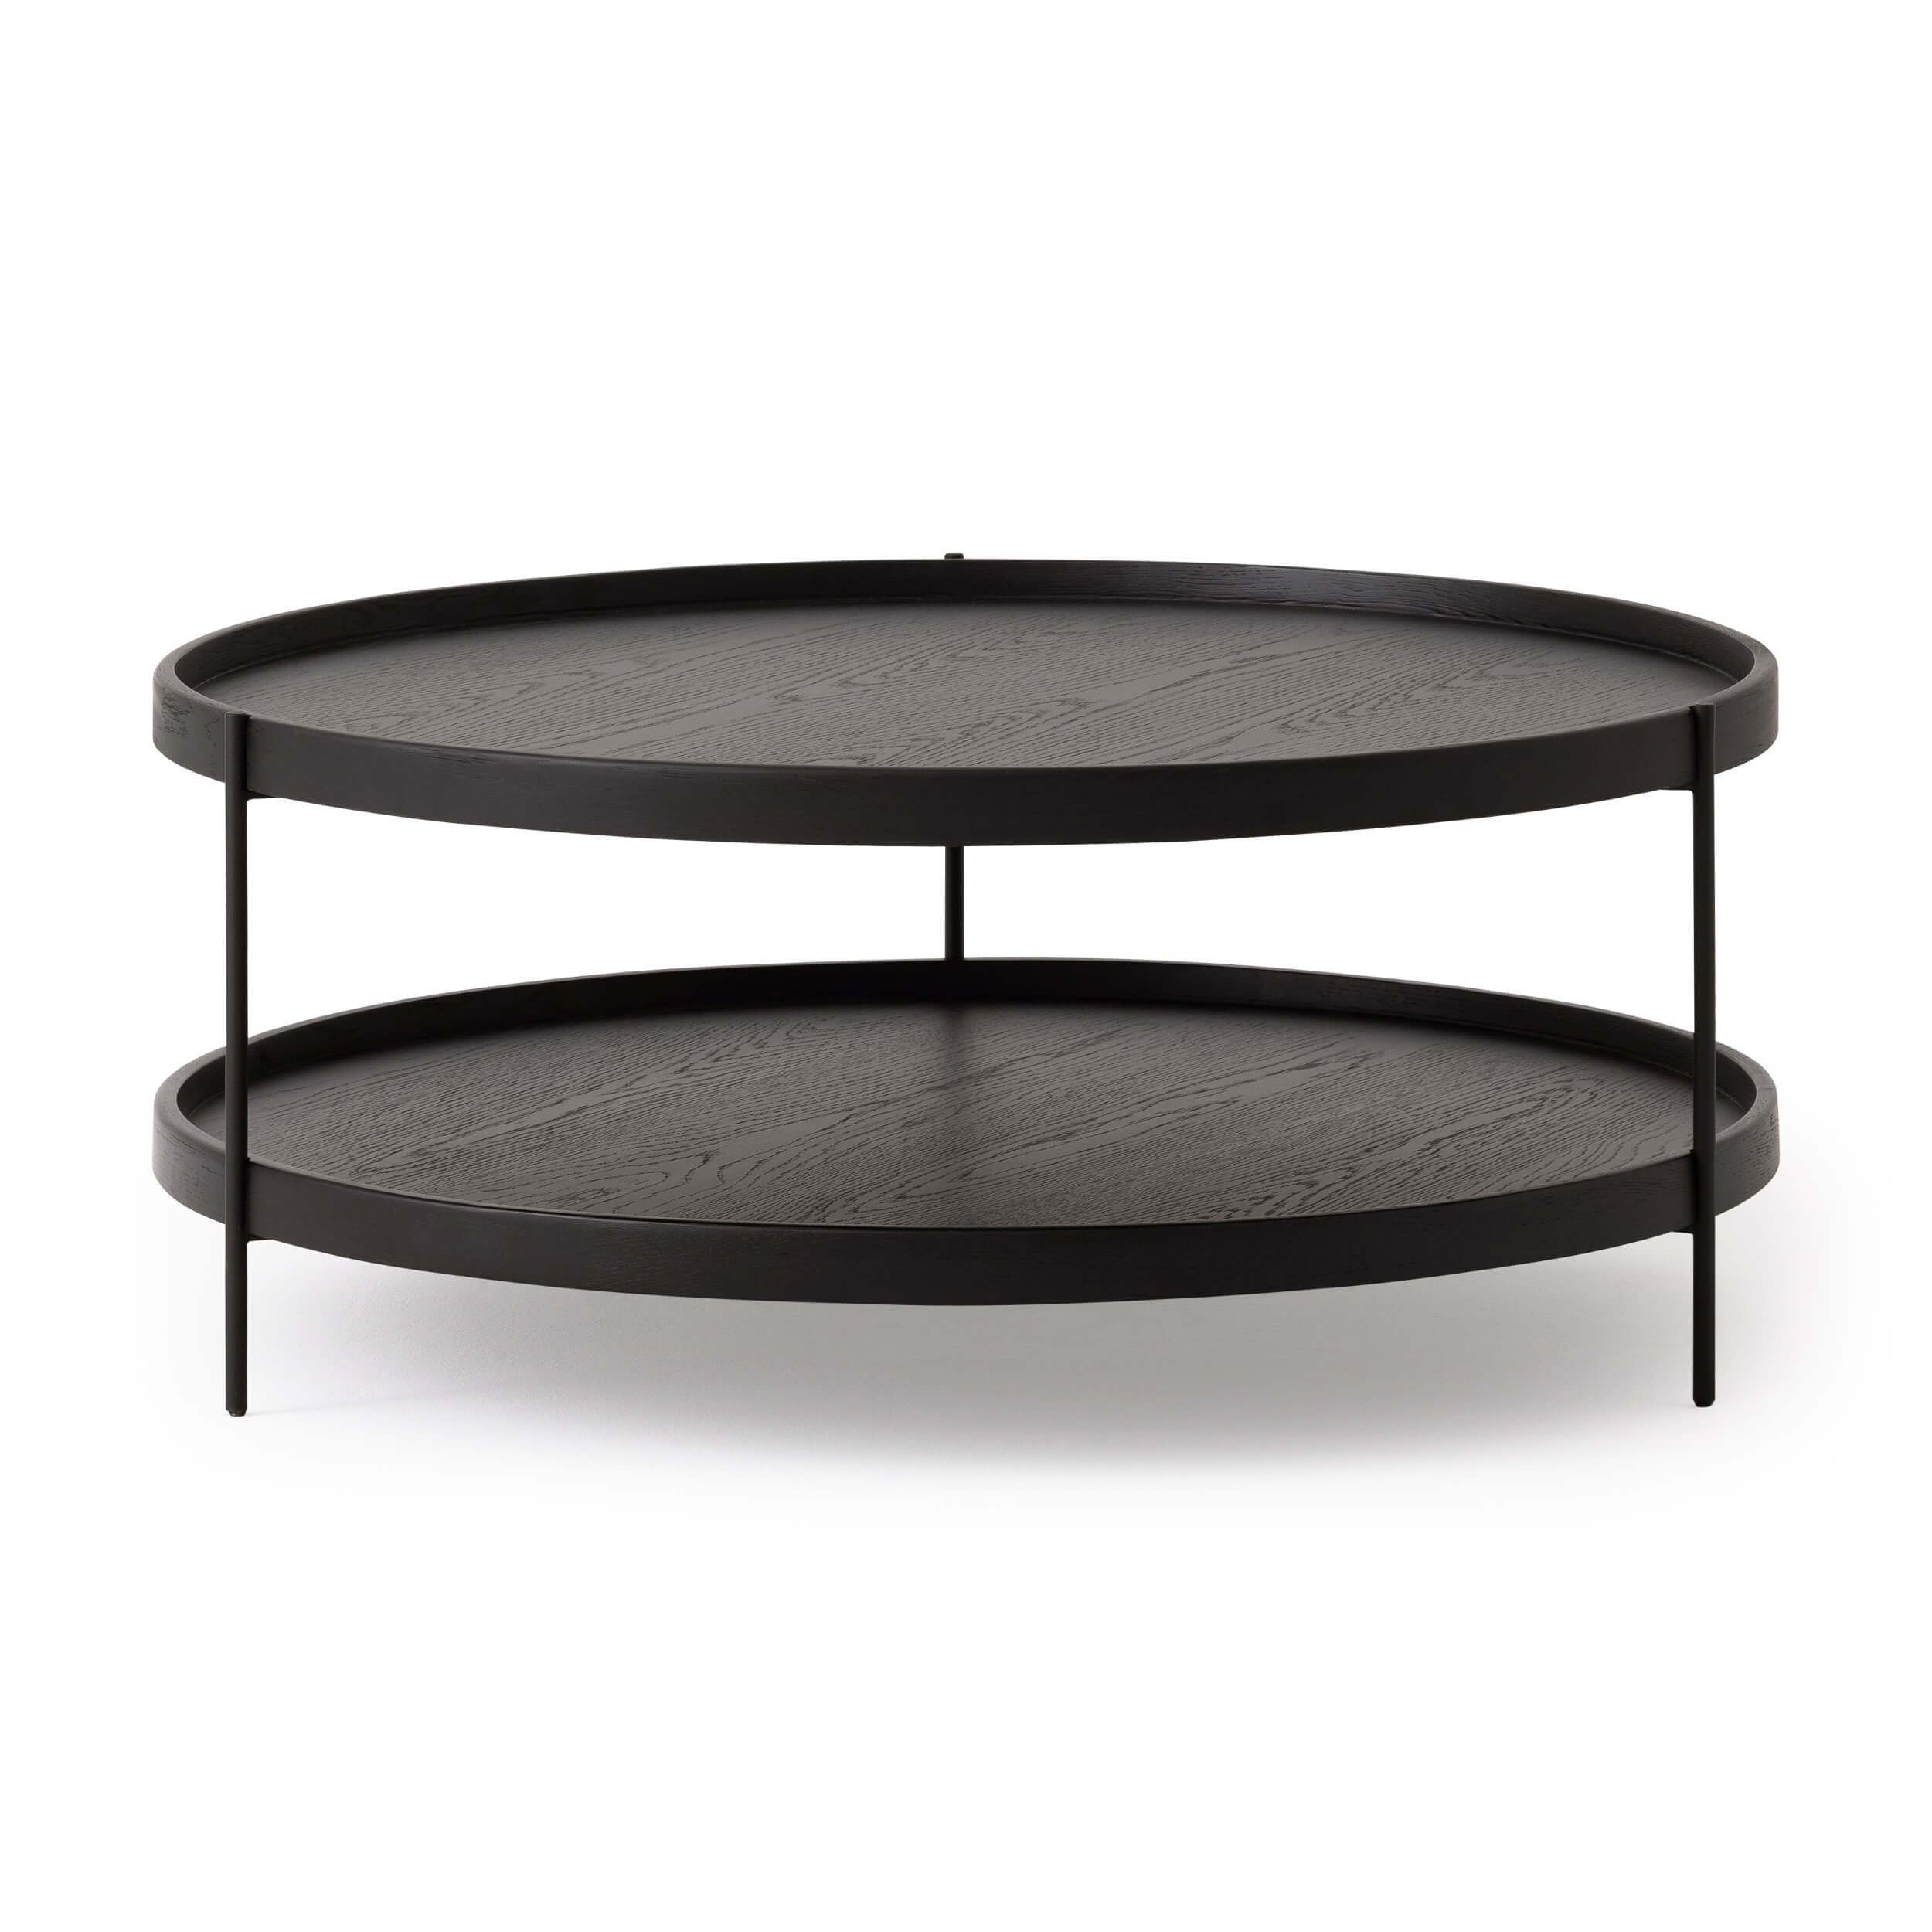 Sage Round Coffee Table | Eq3 Contemporary Coffee Table Throughout Full Black Round Coffee Tables (View 15 of 15)